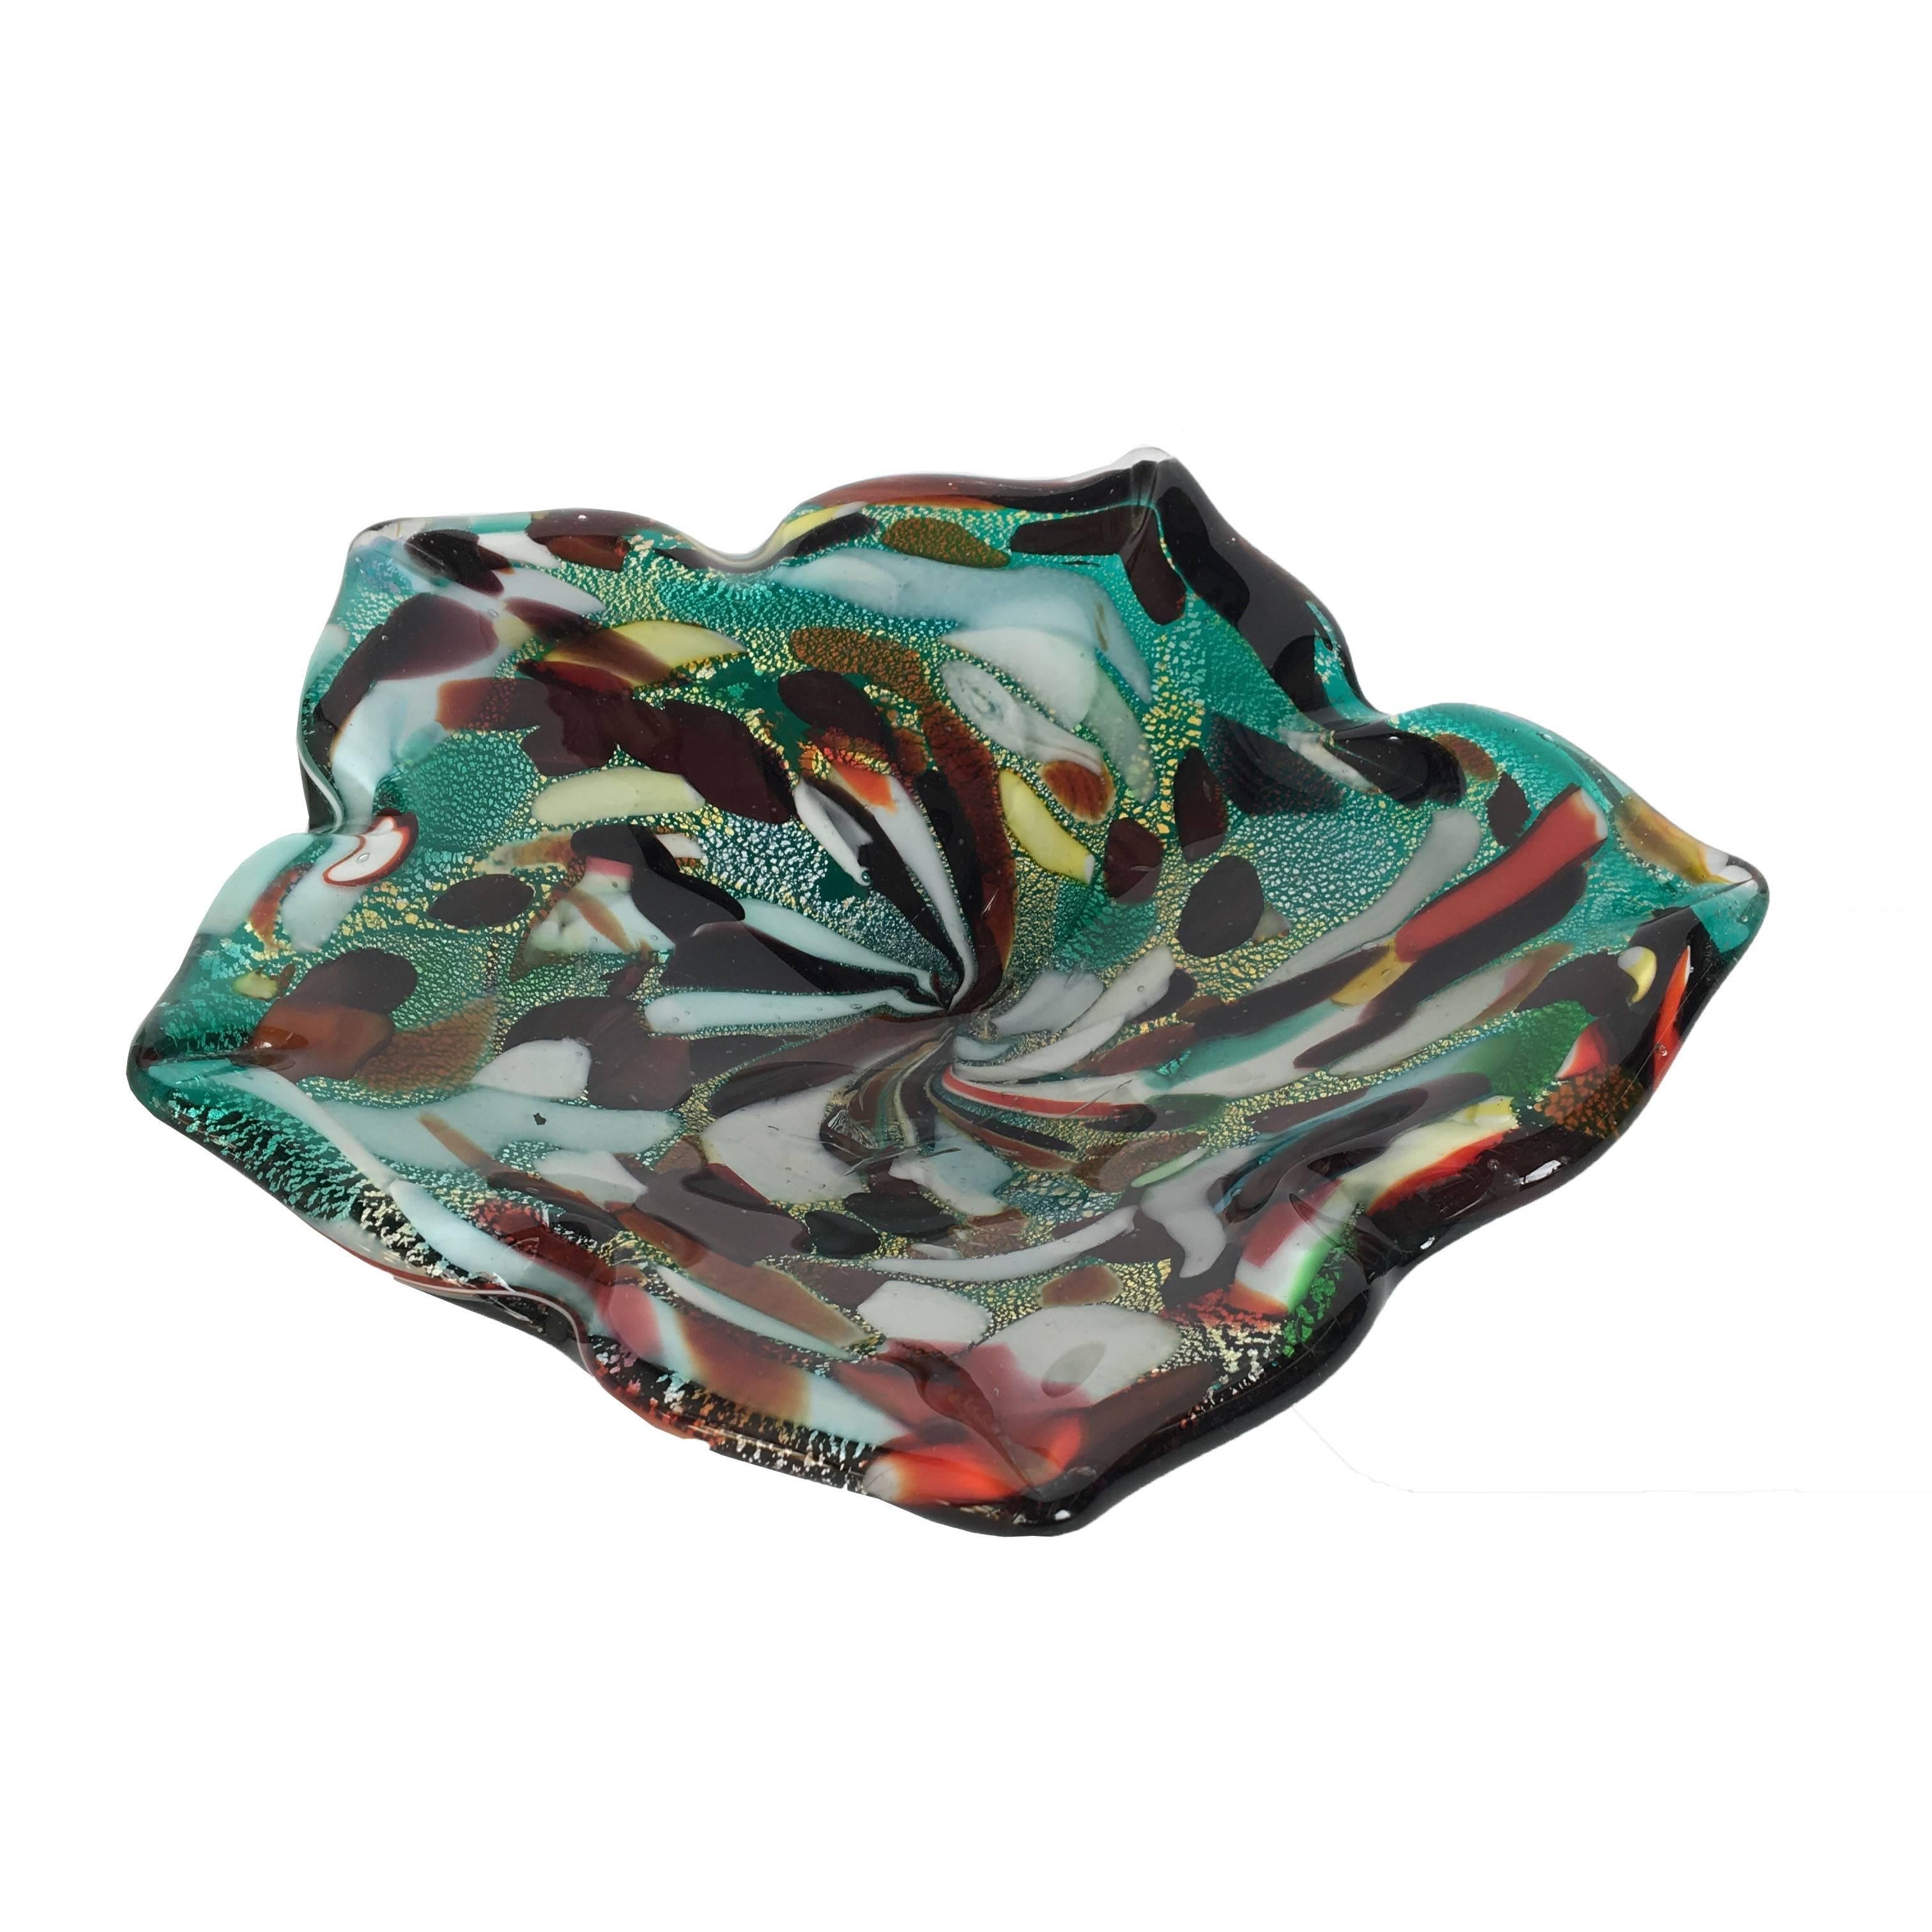 Mid-Century Murano art glass bowl with multiple colors and gold flake throughout. Minor imperfection in glass.